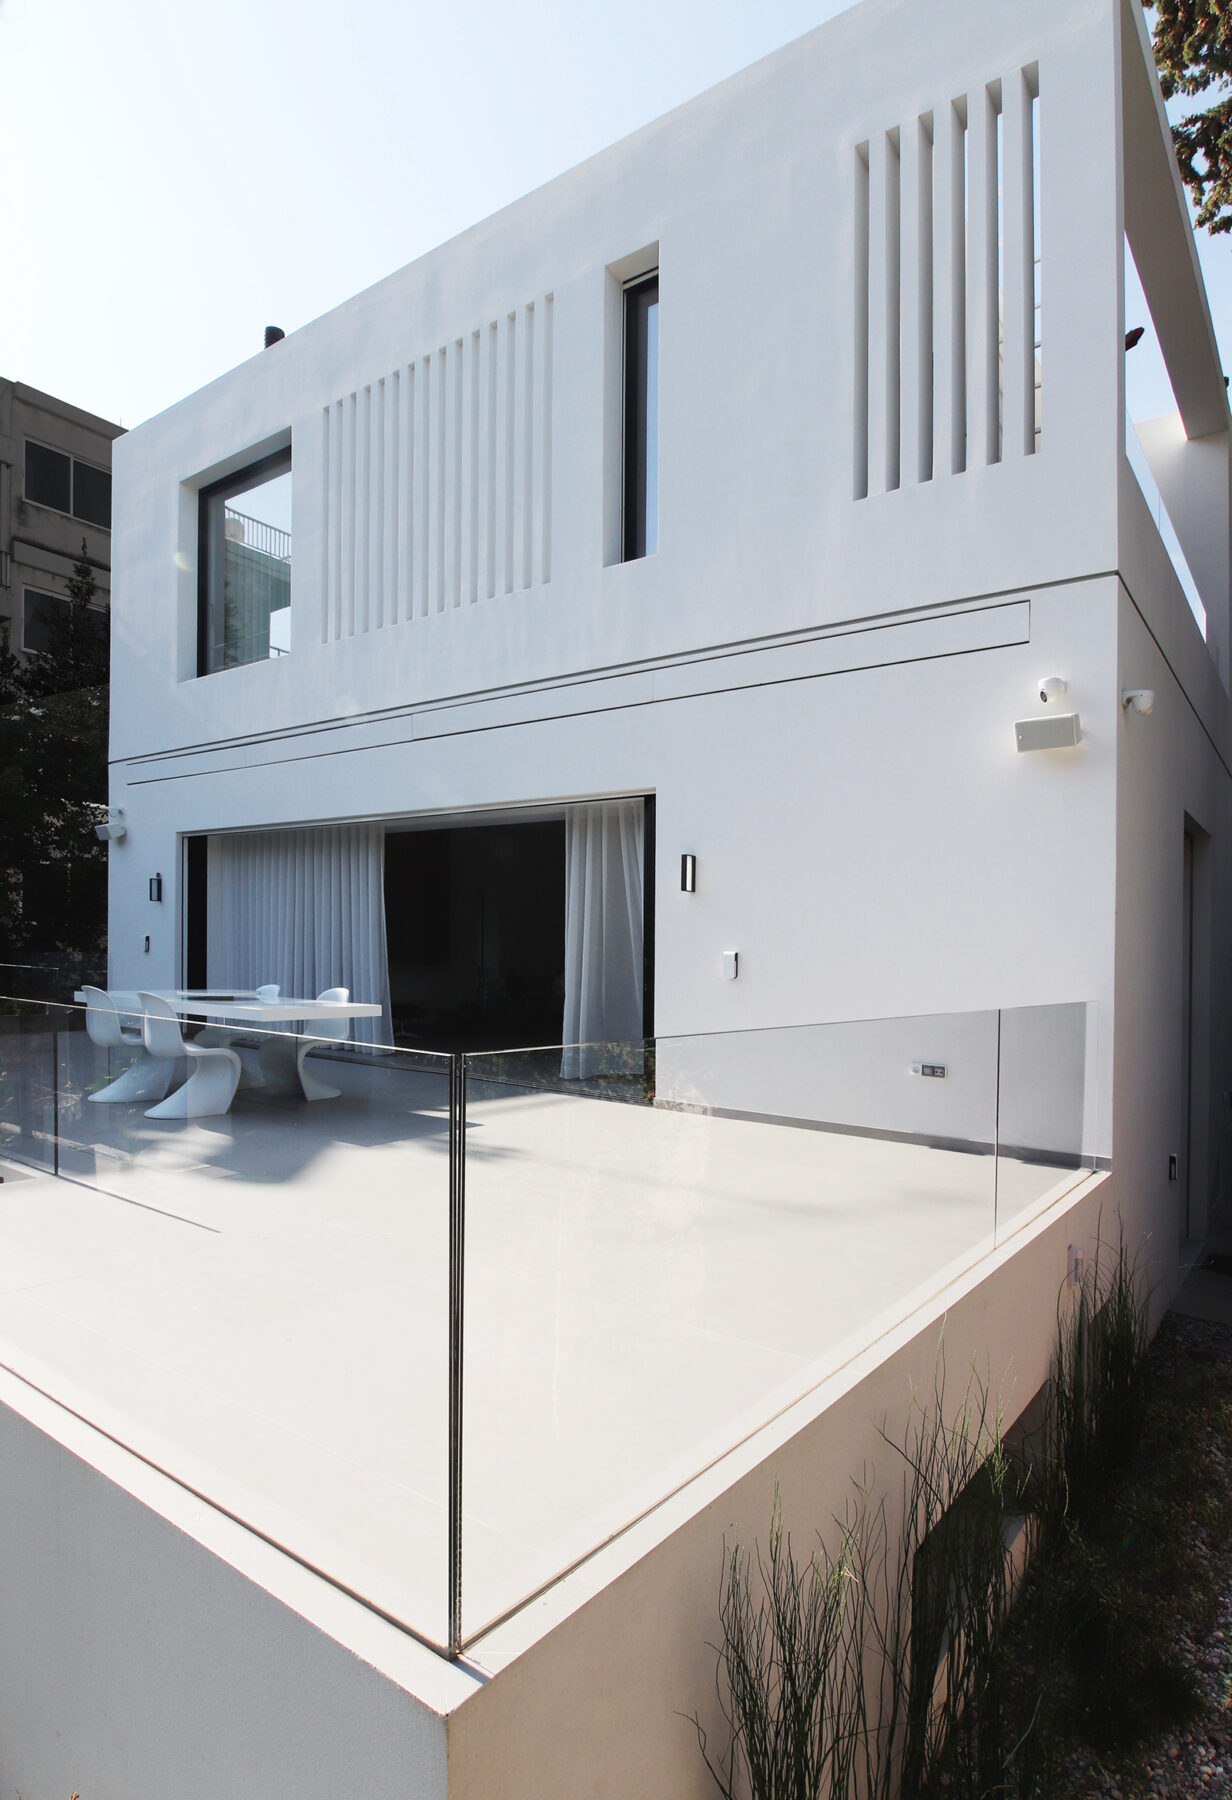 Archisearch K45 Residence, a three level house designed by KKMK Architects in Psychiko.